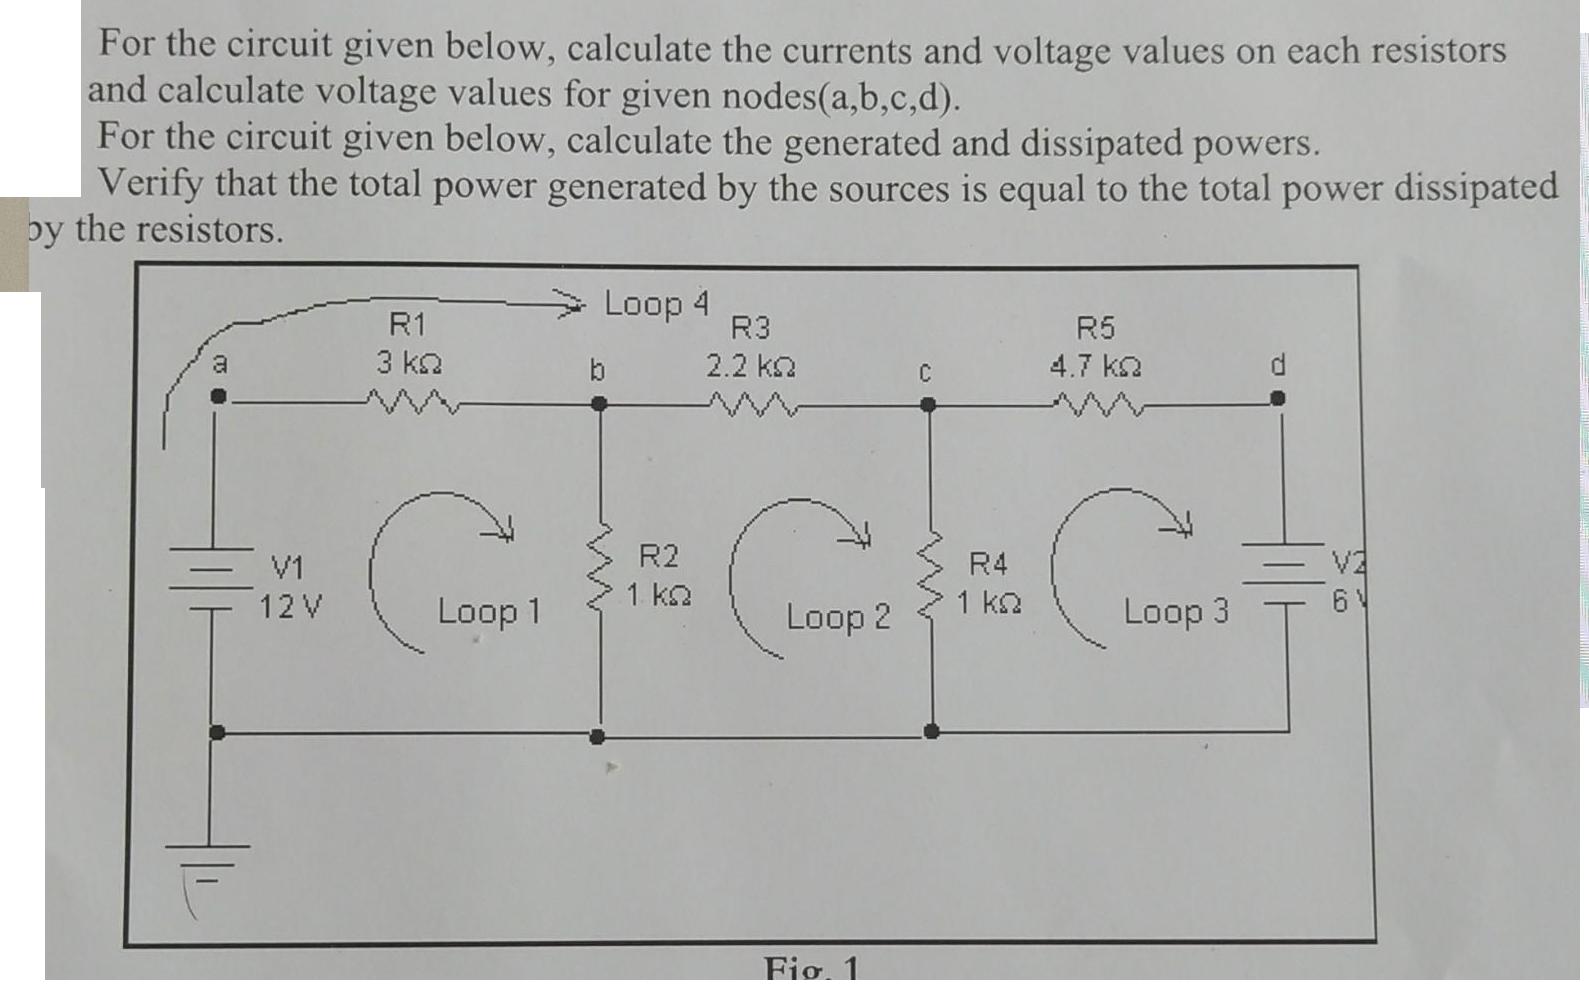 For the circuit given below, calculate the currents and voltage values on each resistors and calculate